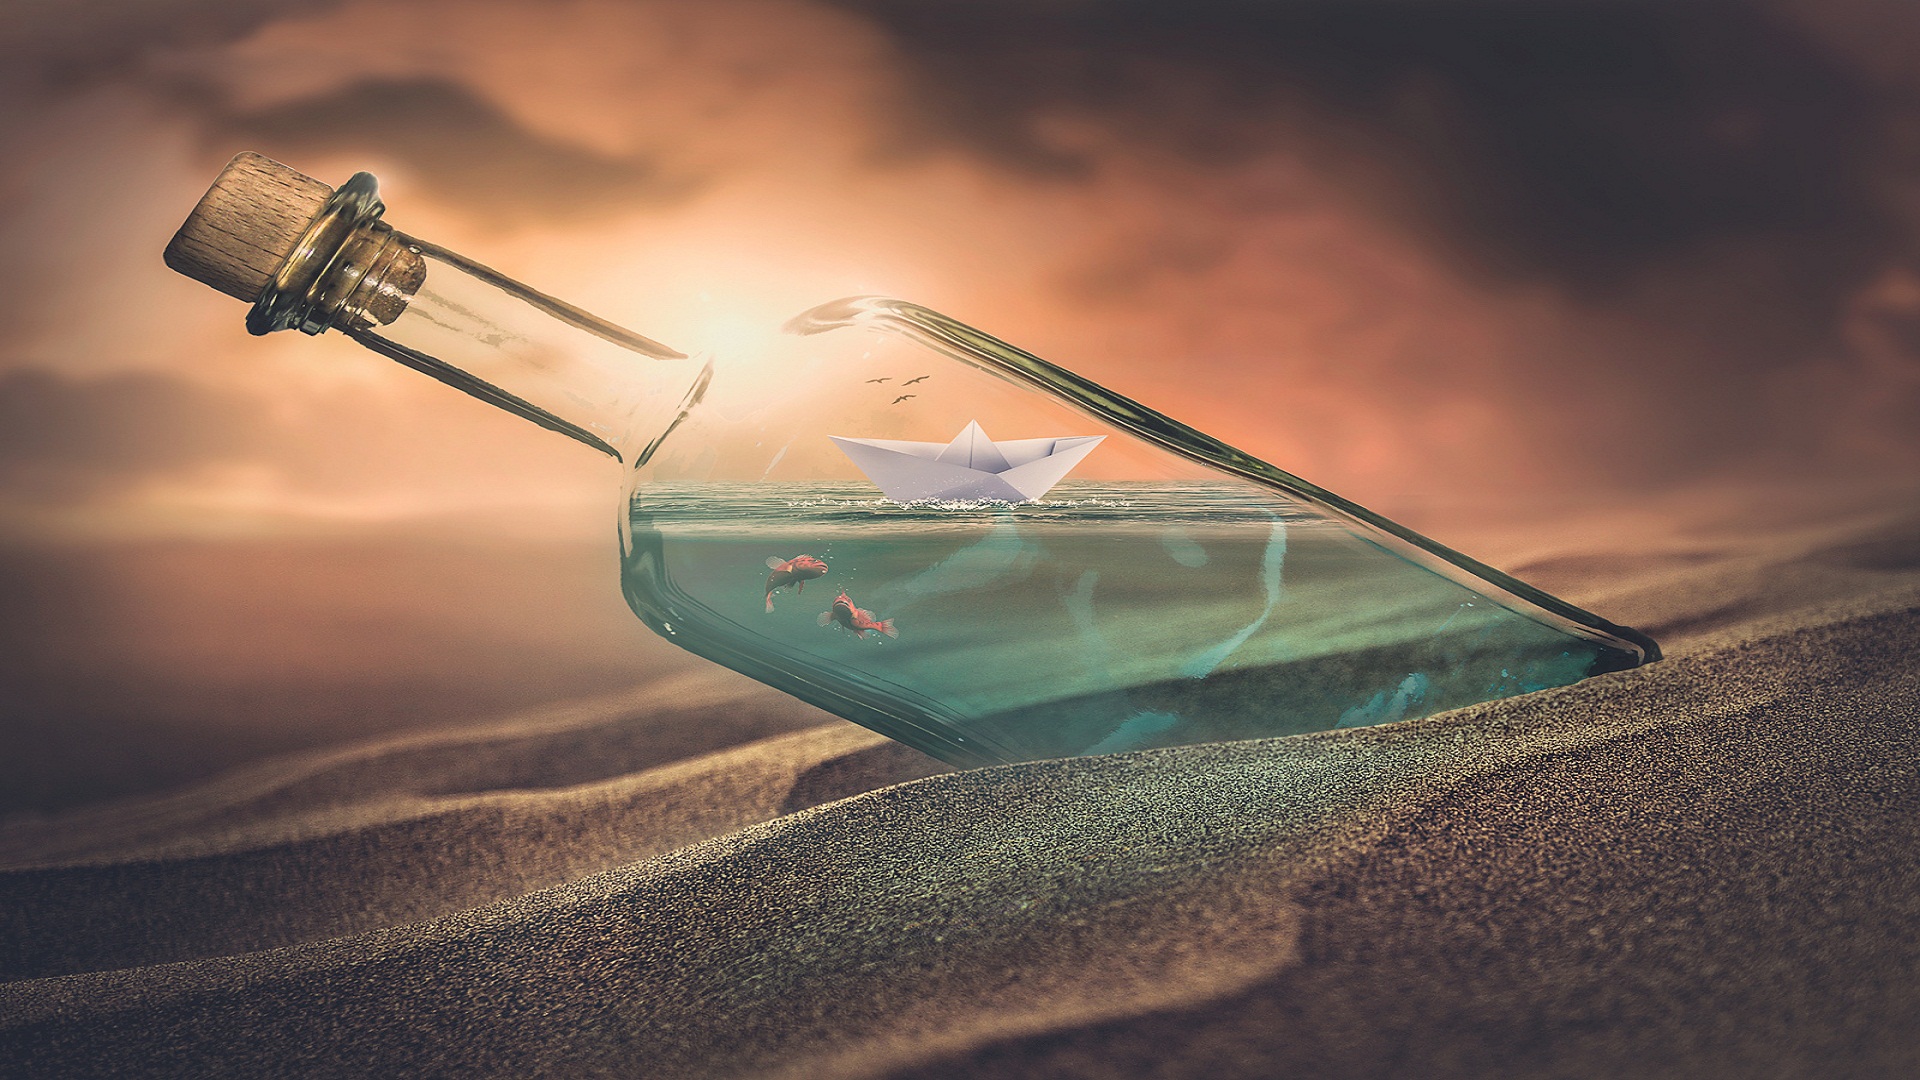 Man Made Ship In A Bottle 1920x1080